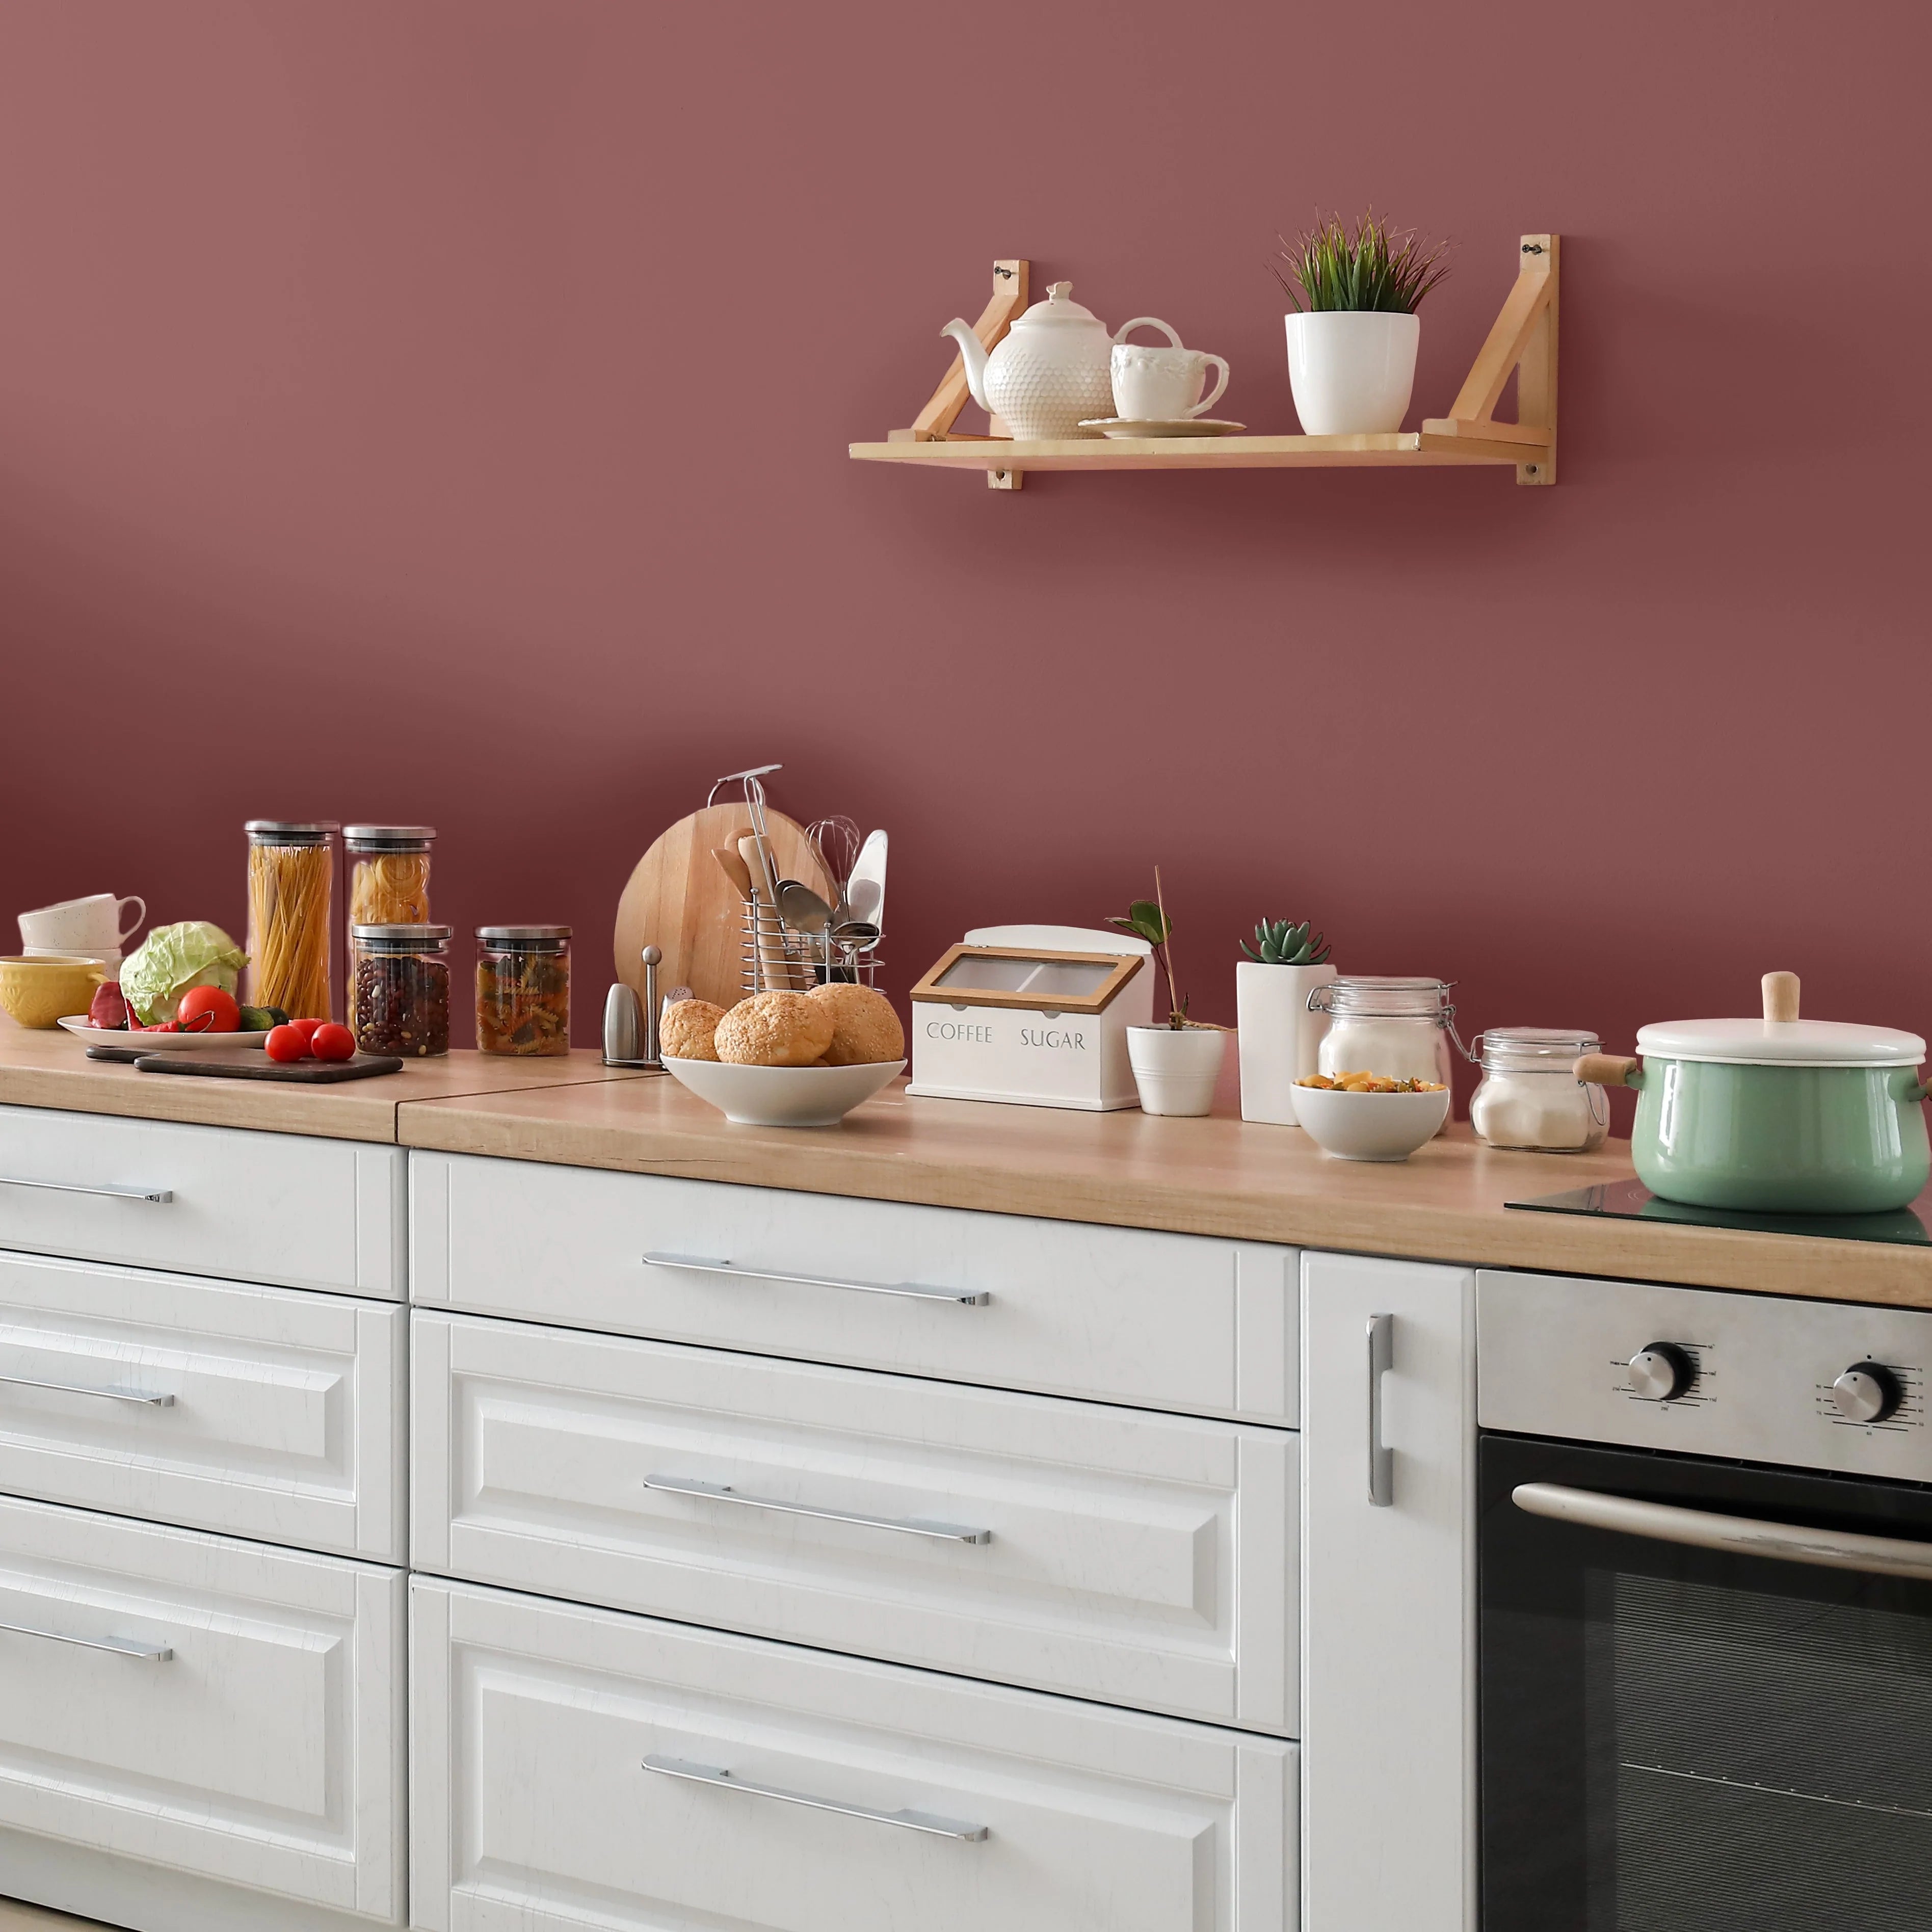 Colourtrend Pink Chocolate | Same Day Dublin and Nationwide Paint in Ireland Delivery by Weirs of Baggot Street - Official Colourtrend Stockist